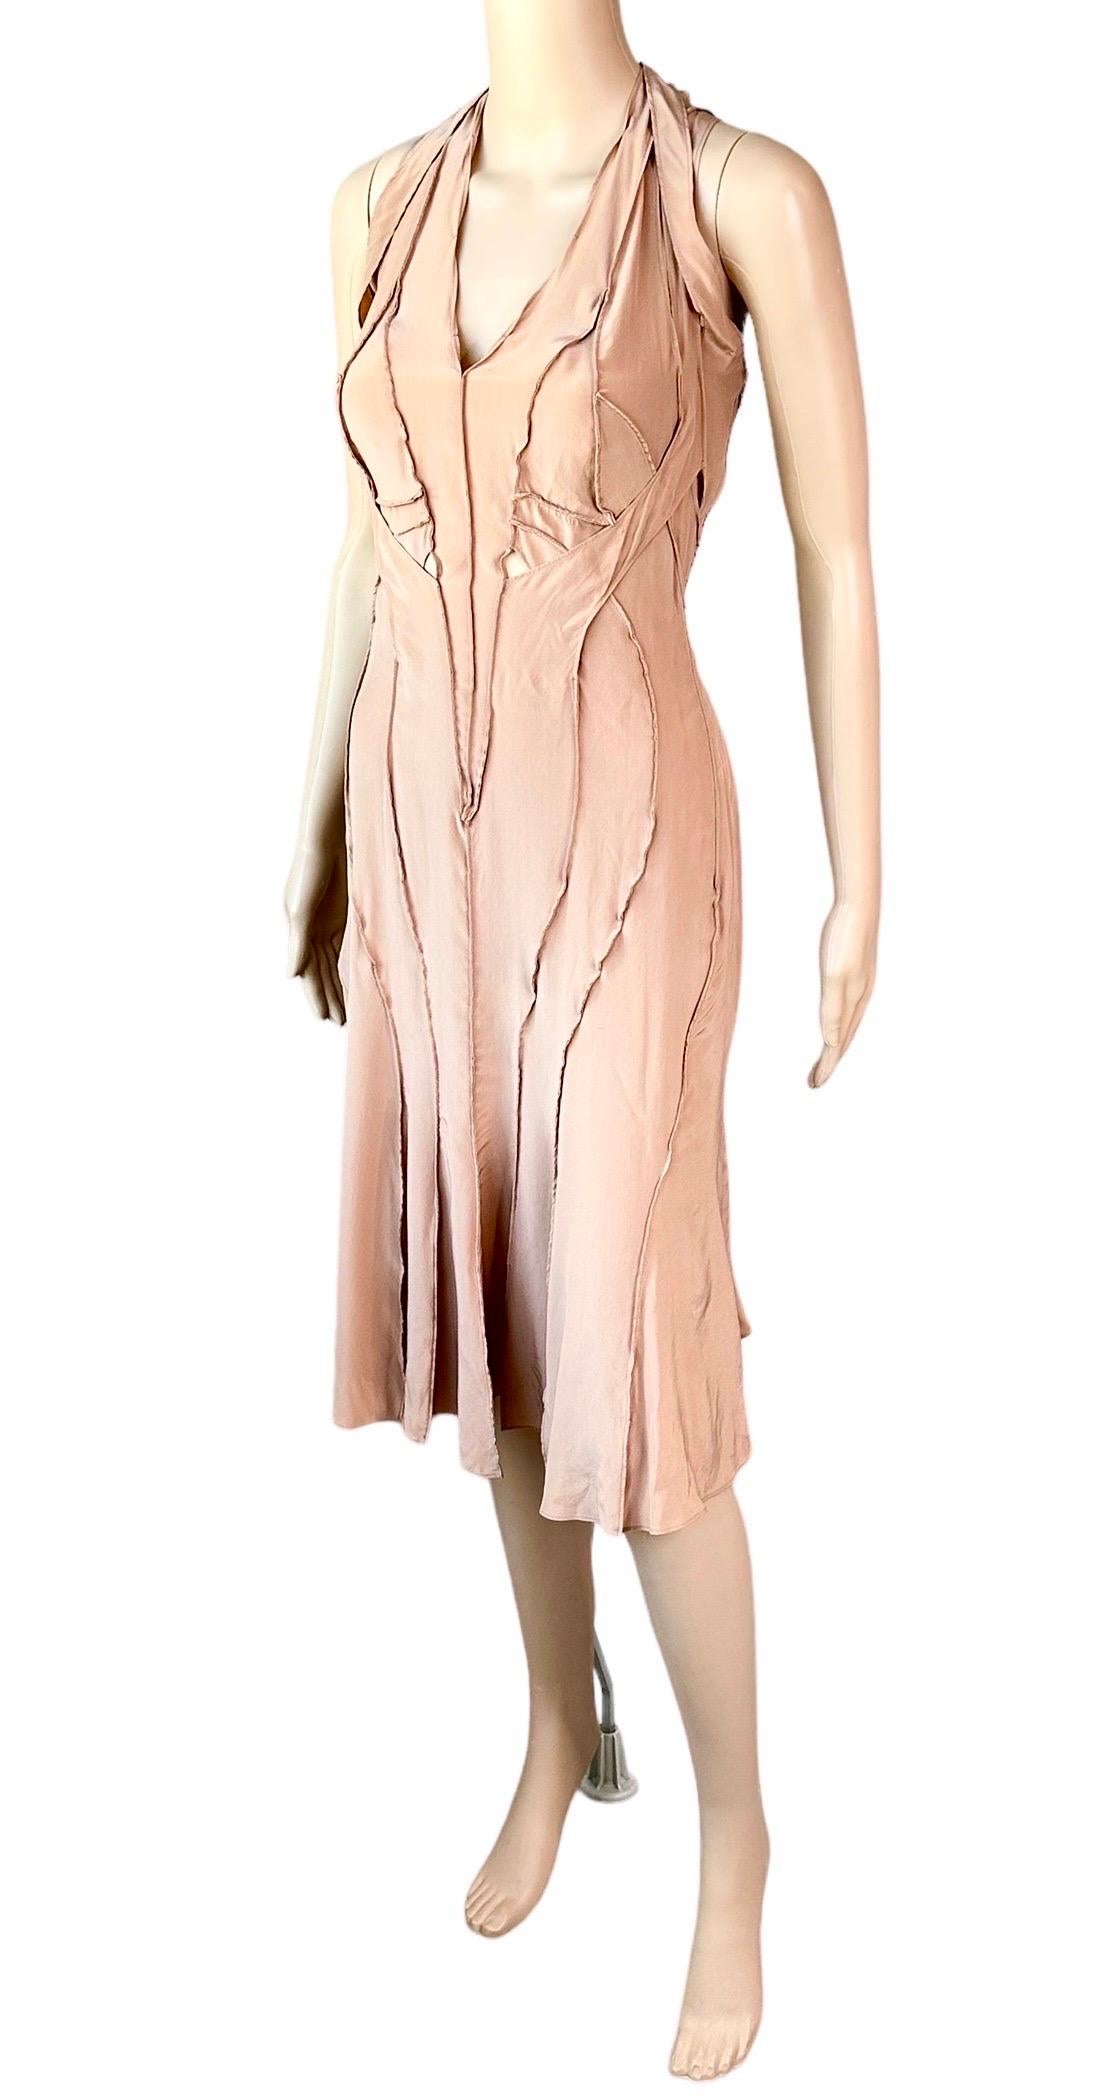 Women's Tom Ford for Yves Saint Laurent YSL S/S 2003 Runway Cutout Silk Dress  For Sale